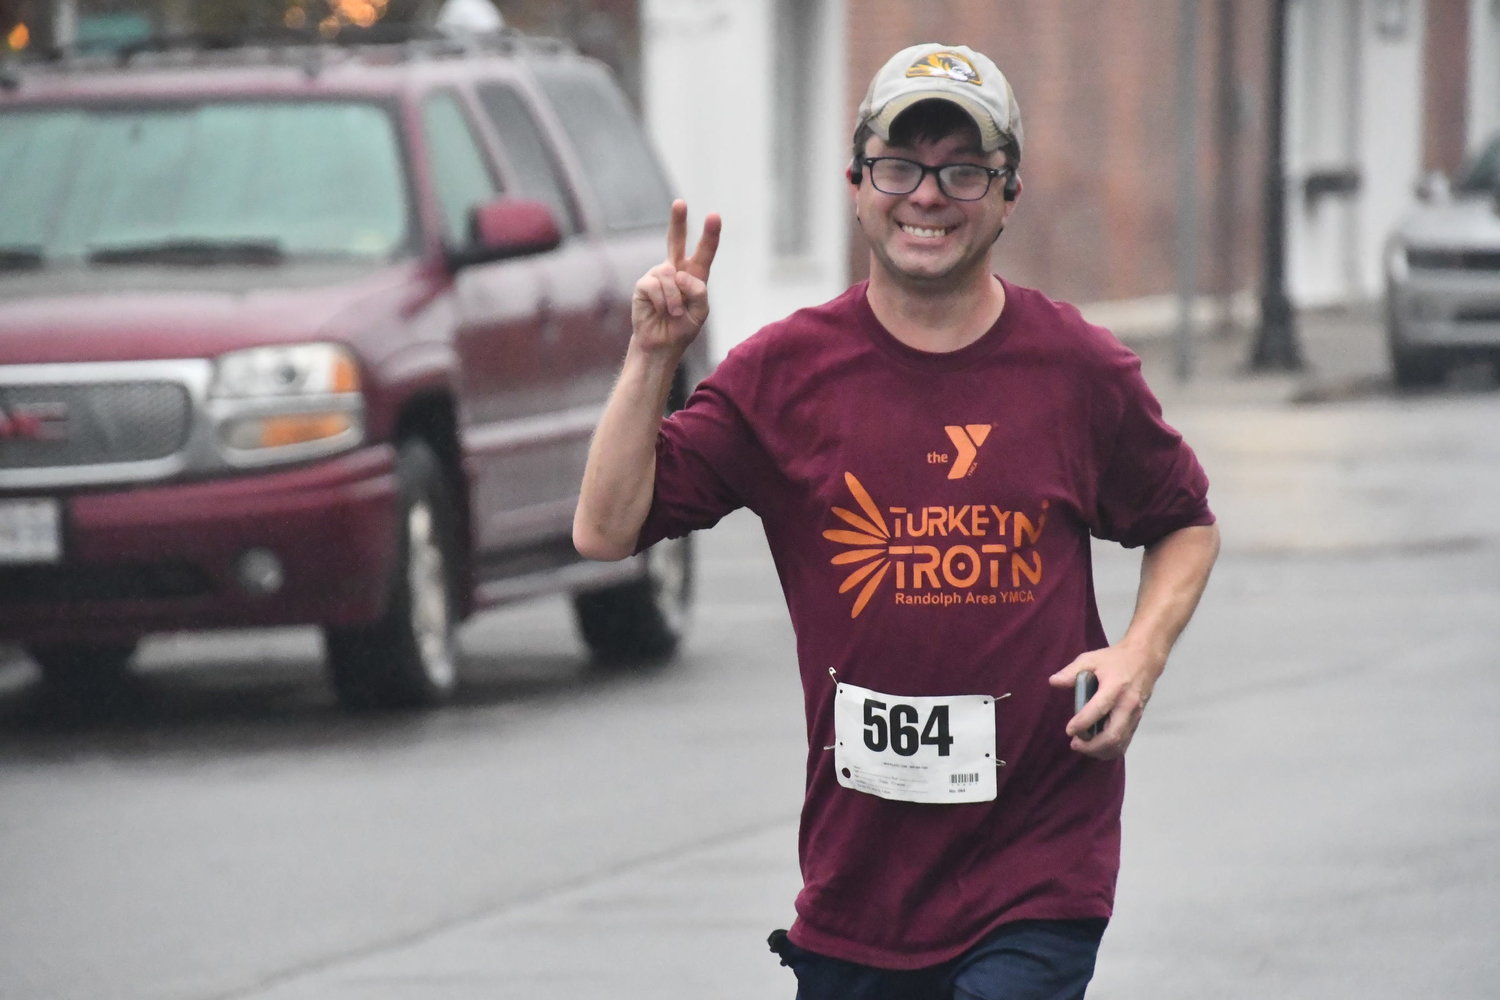 Danny Owens smiles and gives the "peace" sign as he runs toward the finish line.